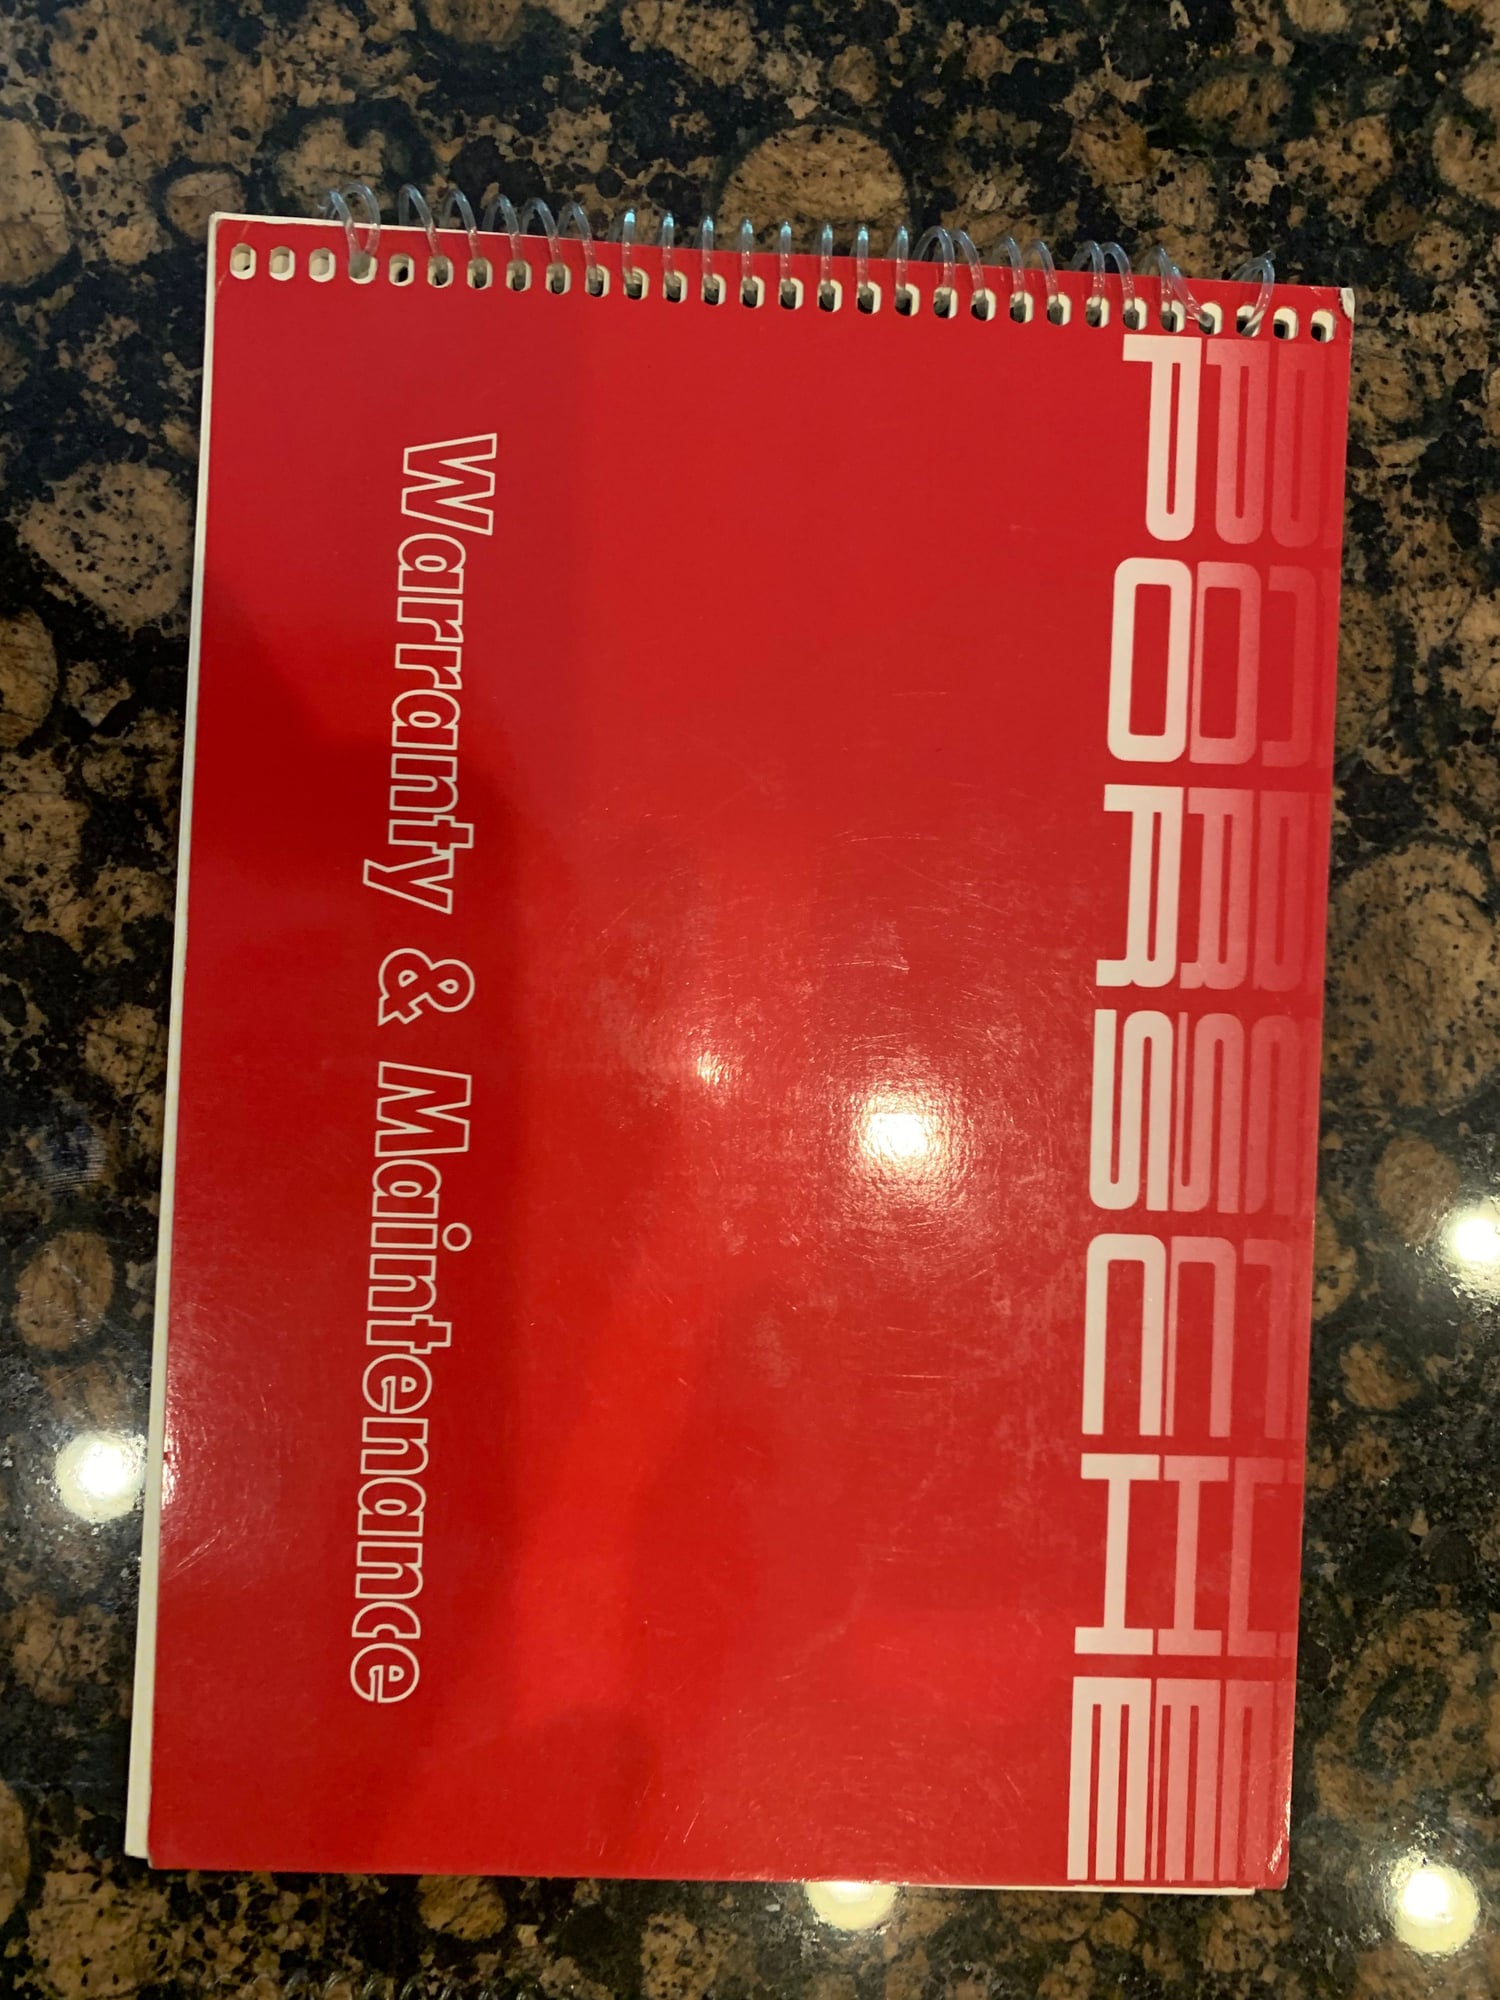 Accessories - 1986 Porsche 944 / 944 Turbo with owners manual folder - Used - 1986 Porsche 944 - Scottsdale, AZ 85259, United States